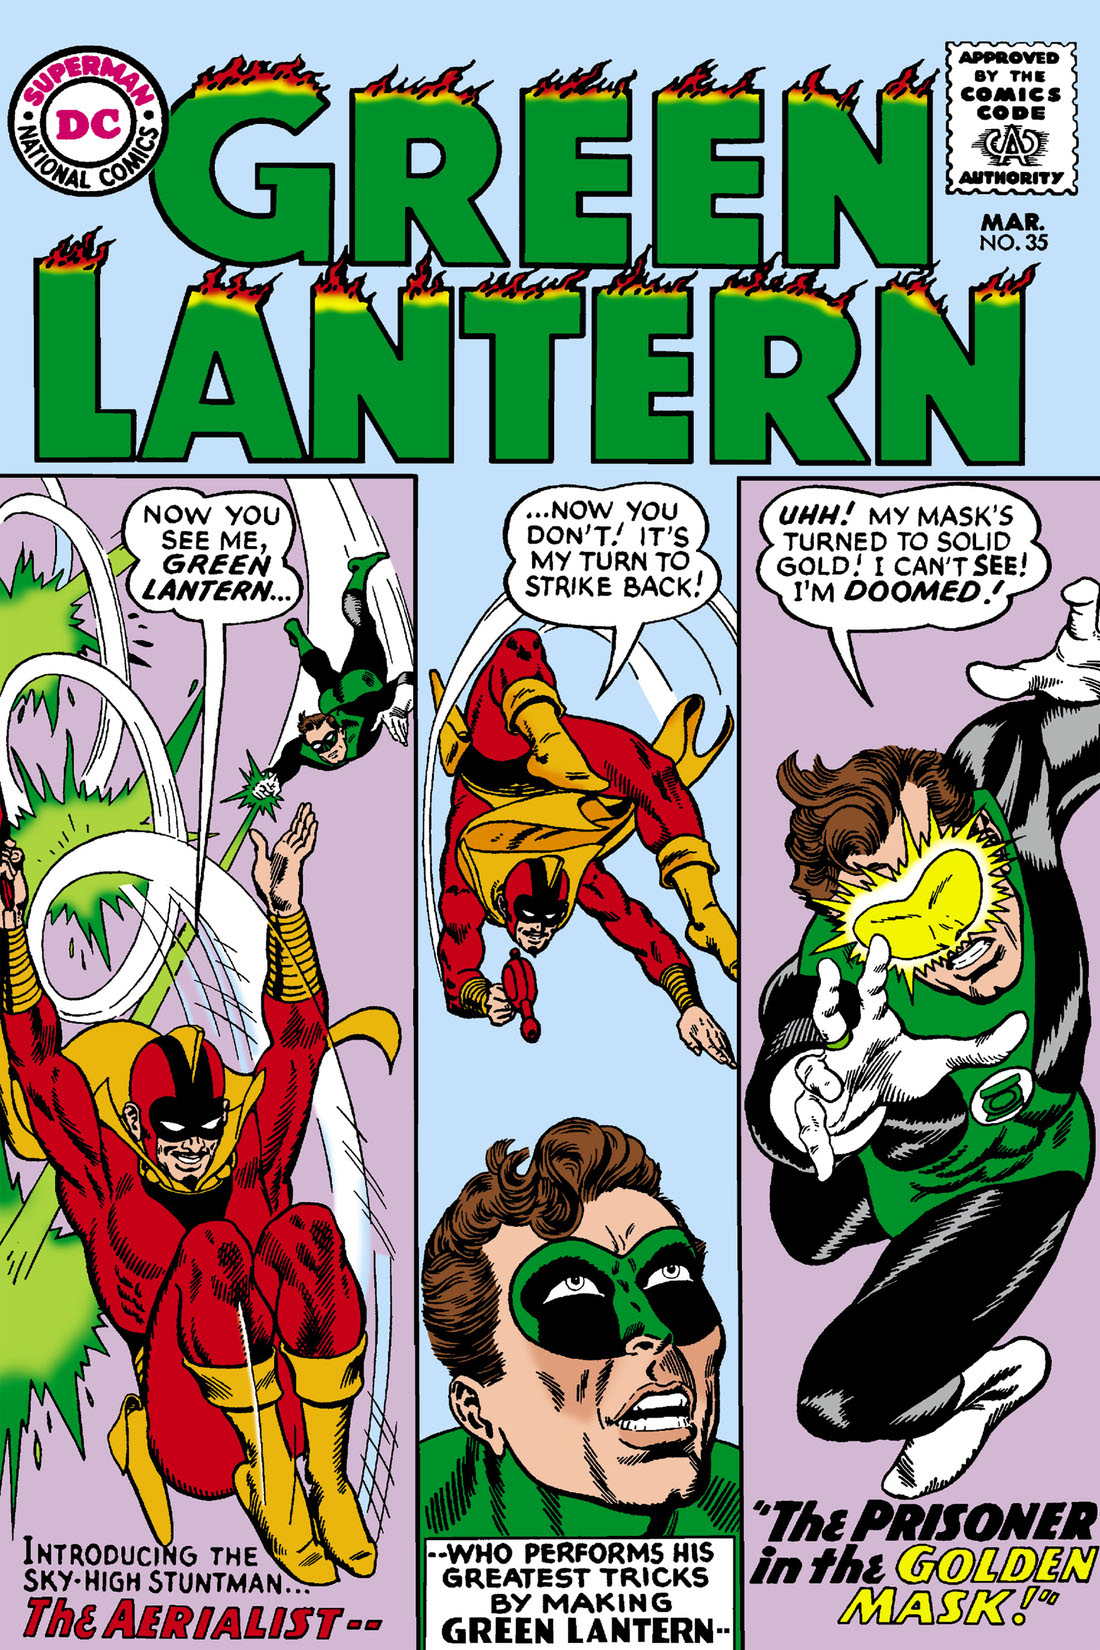 Green Lantern (1960-) #35 preview images